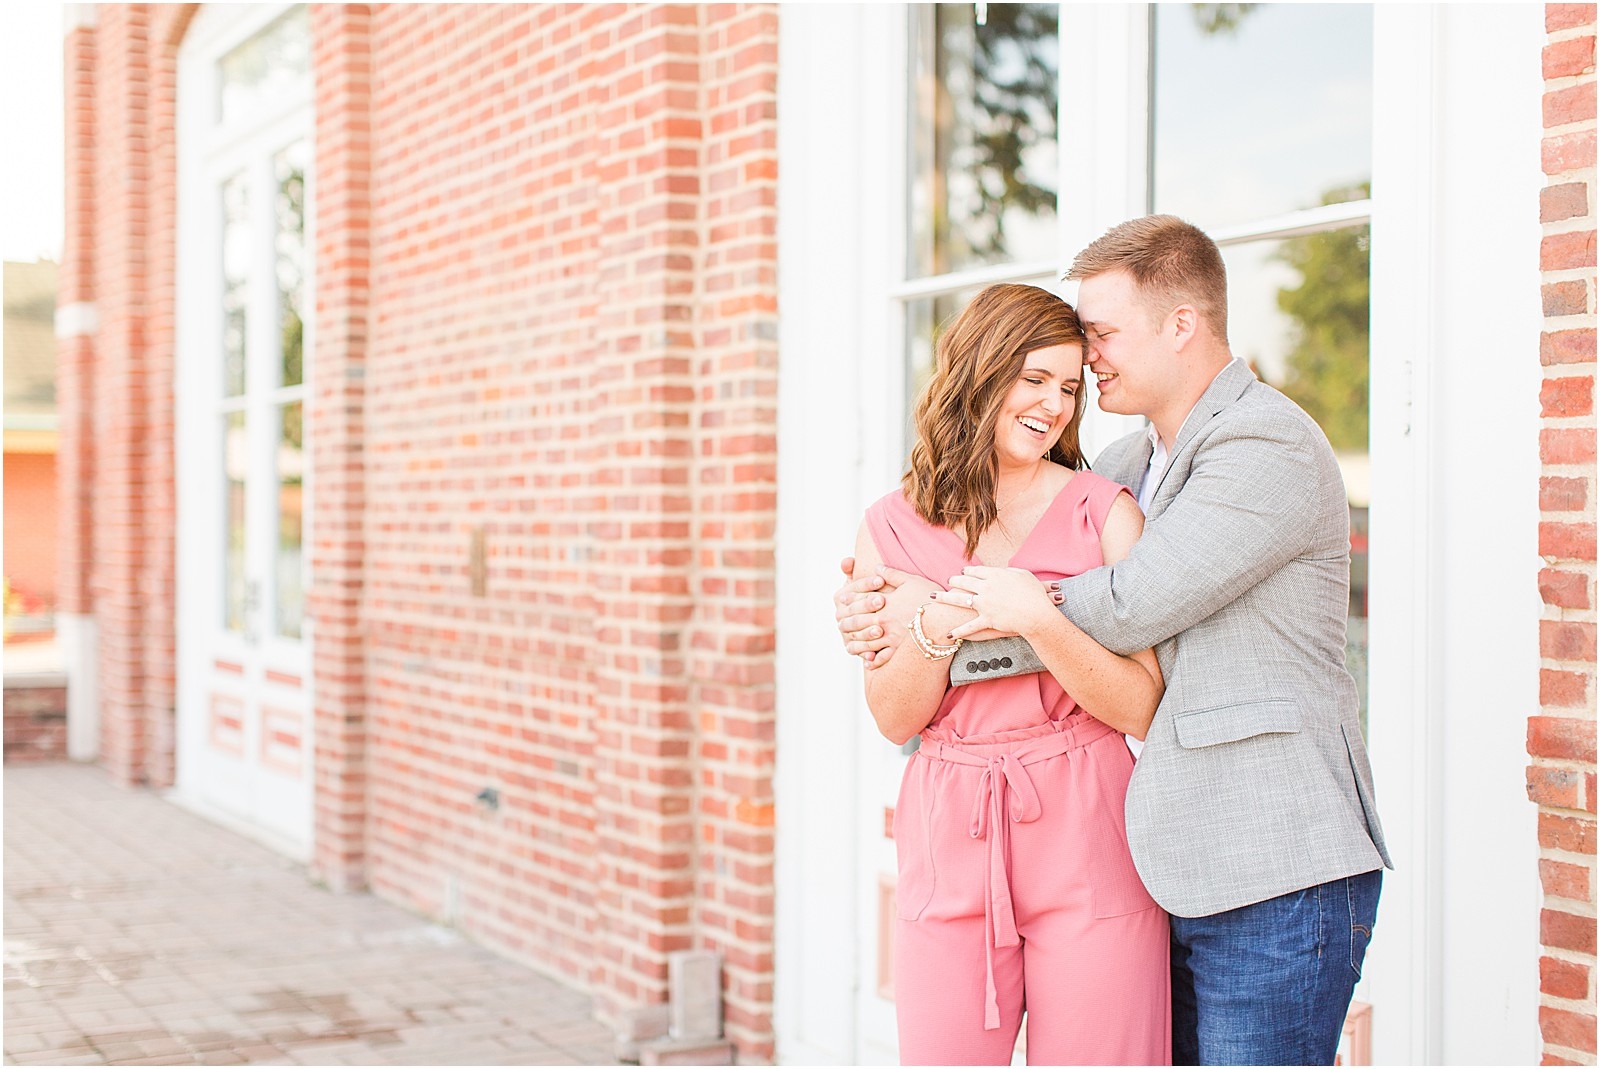 Downtown Huntingburgh Engagement Session | Gabby and Aidan | Bret and Brtandie Photography 007.jpg